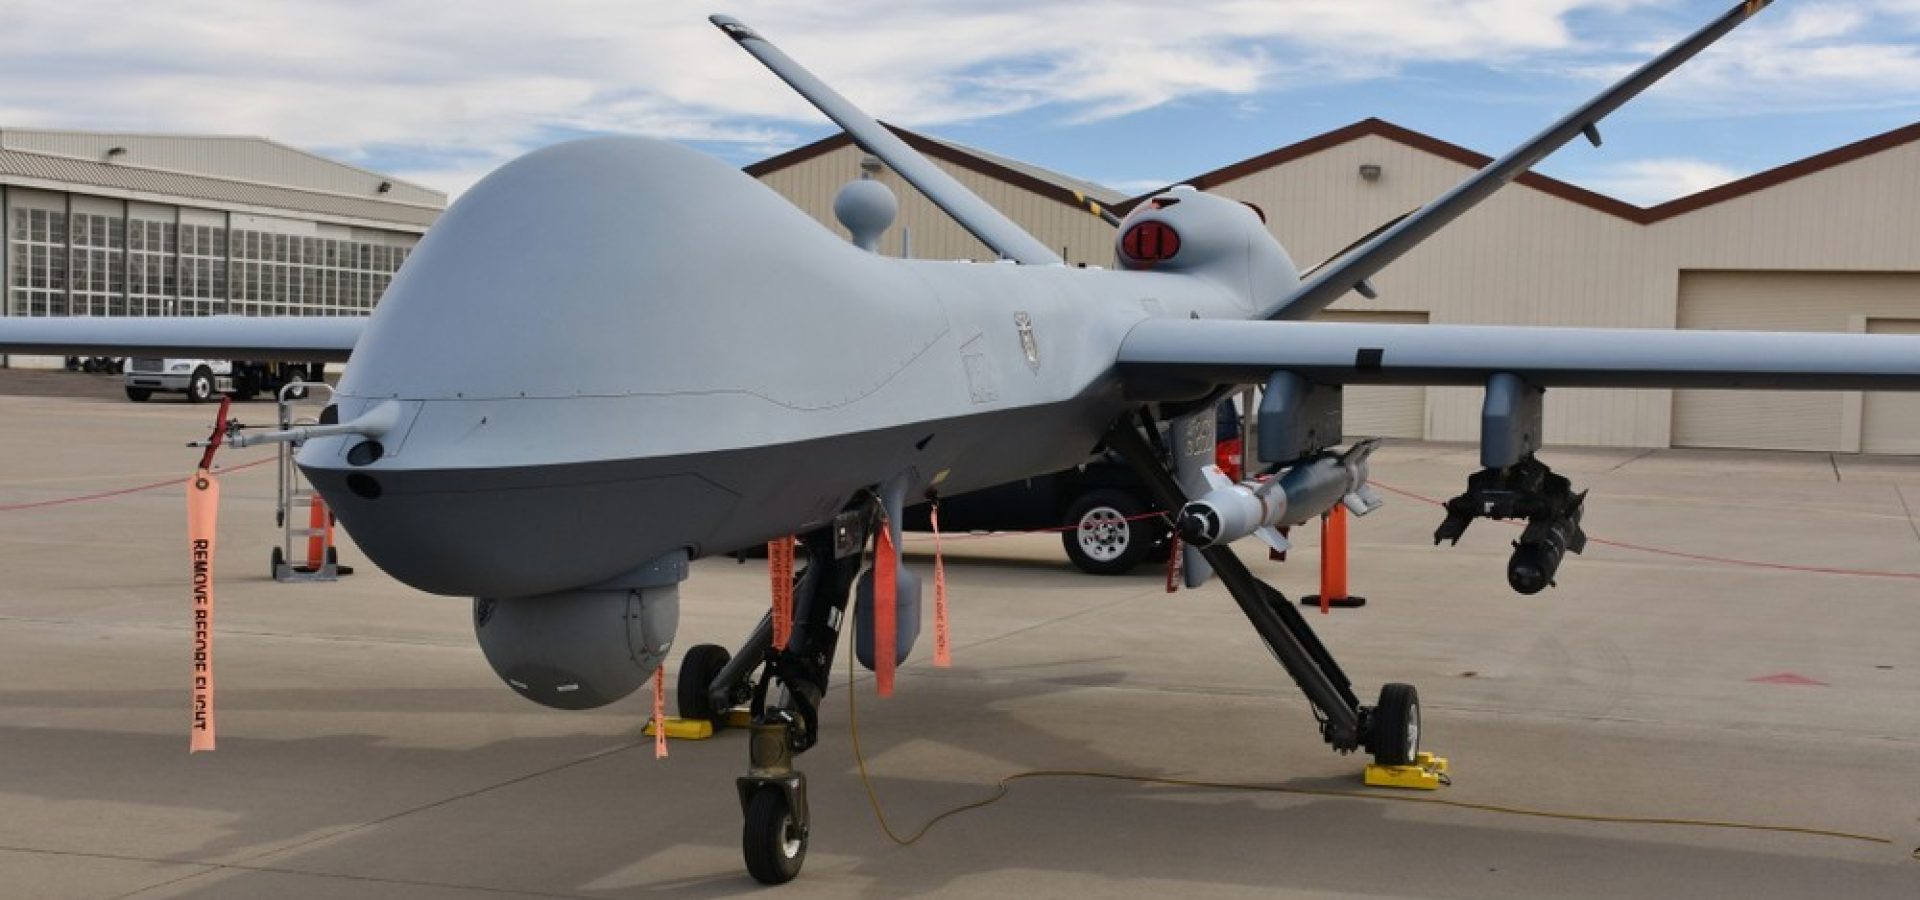 Wibest – Turkish: A military drone in an army base.